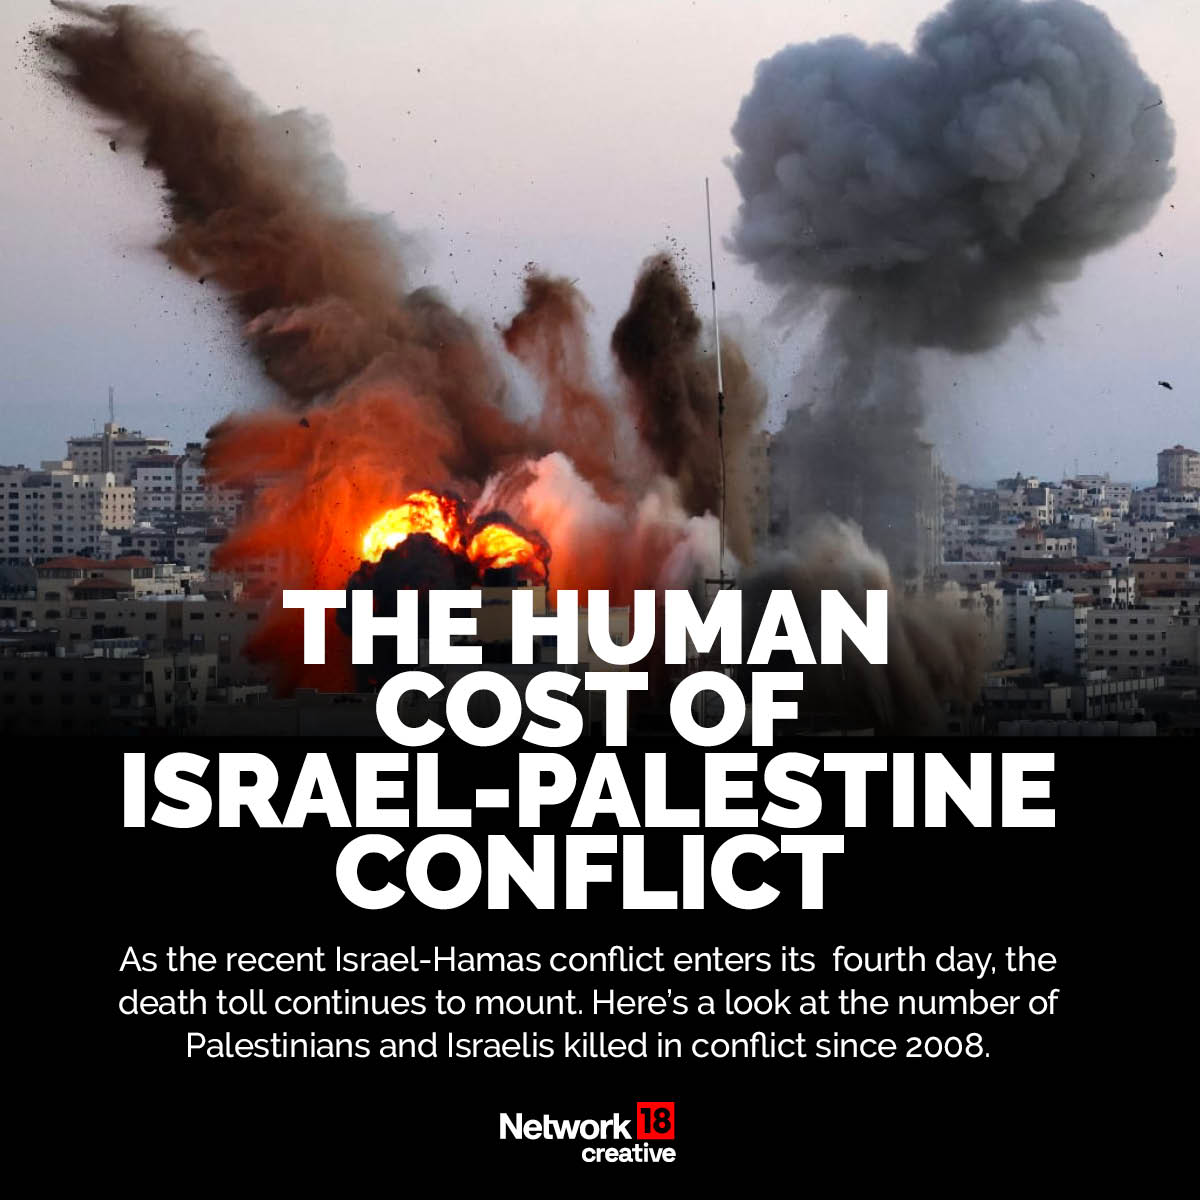 Israel-Palestine conflict: The human cost of war